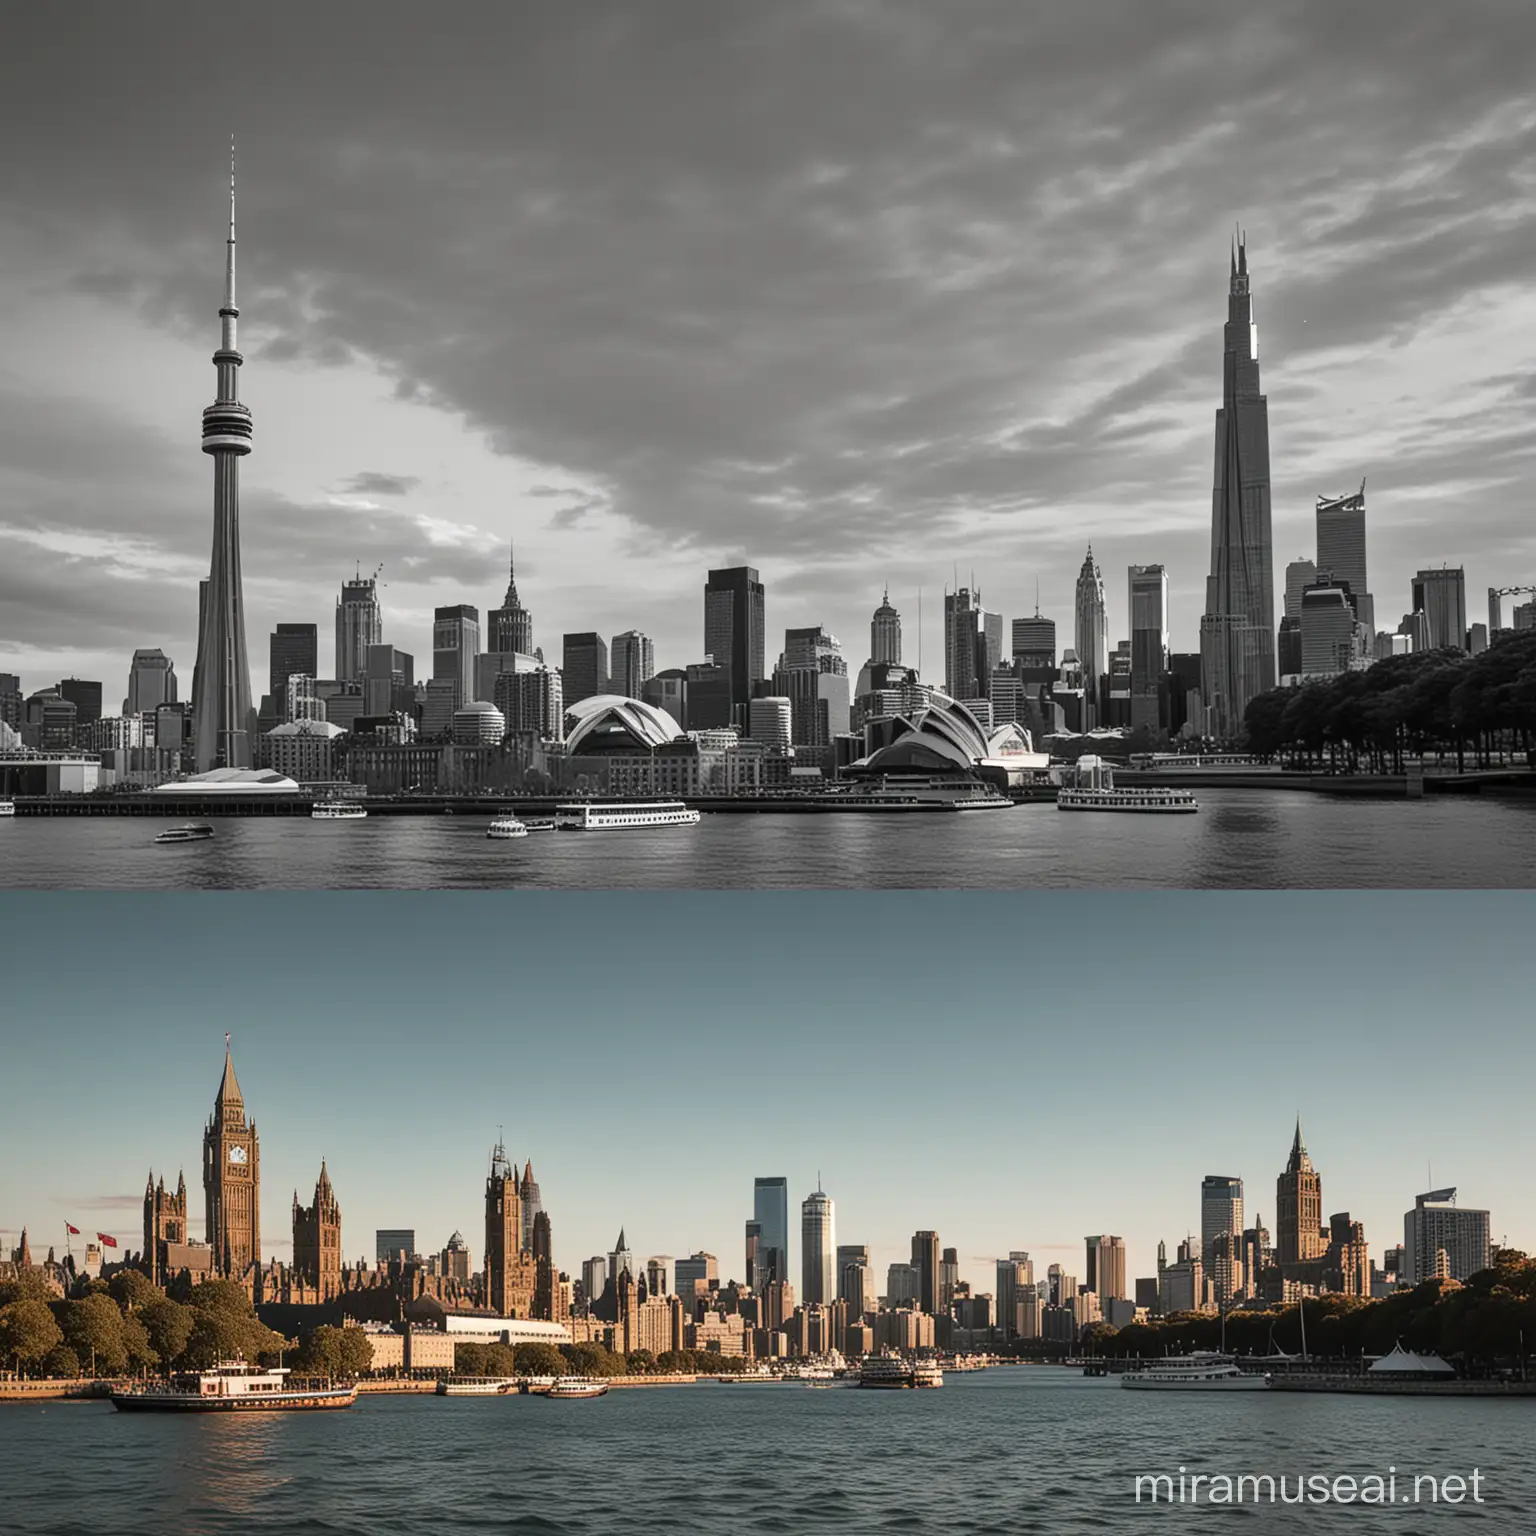 Iconic Buildings of Canada USA Australia and UK in Unified Urban Landscape